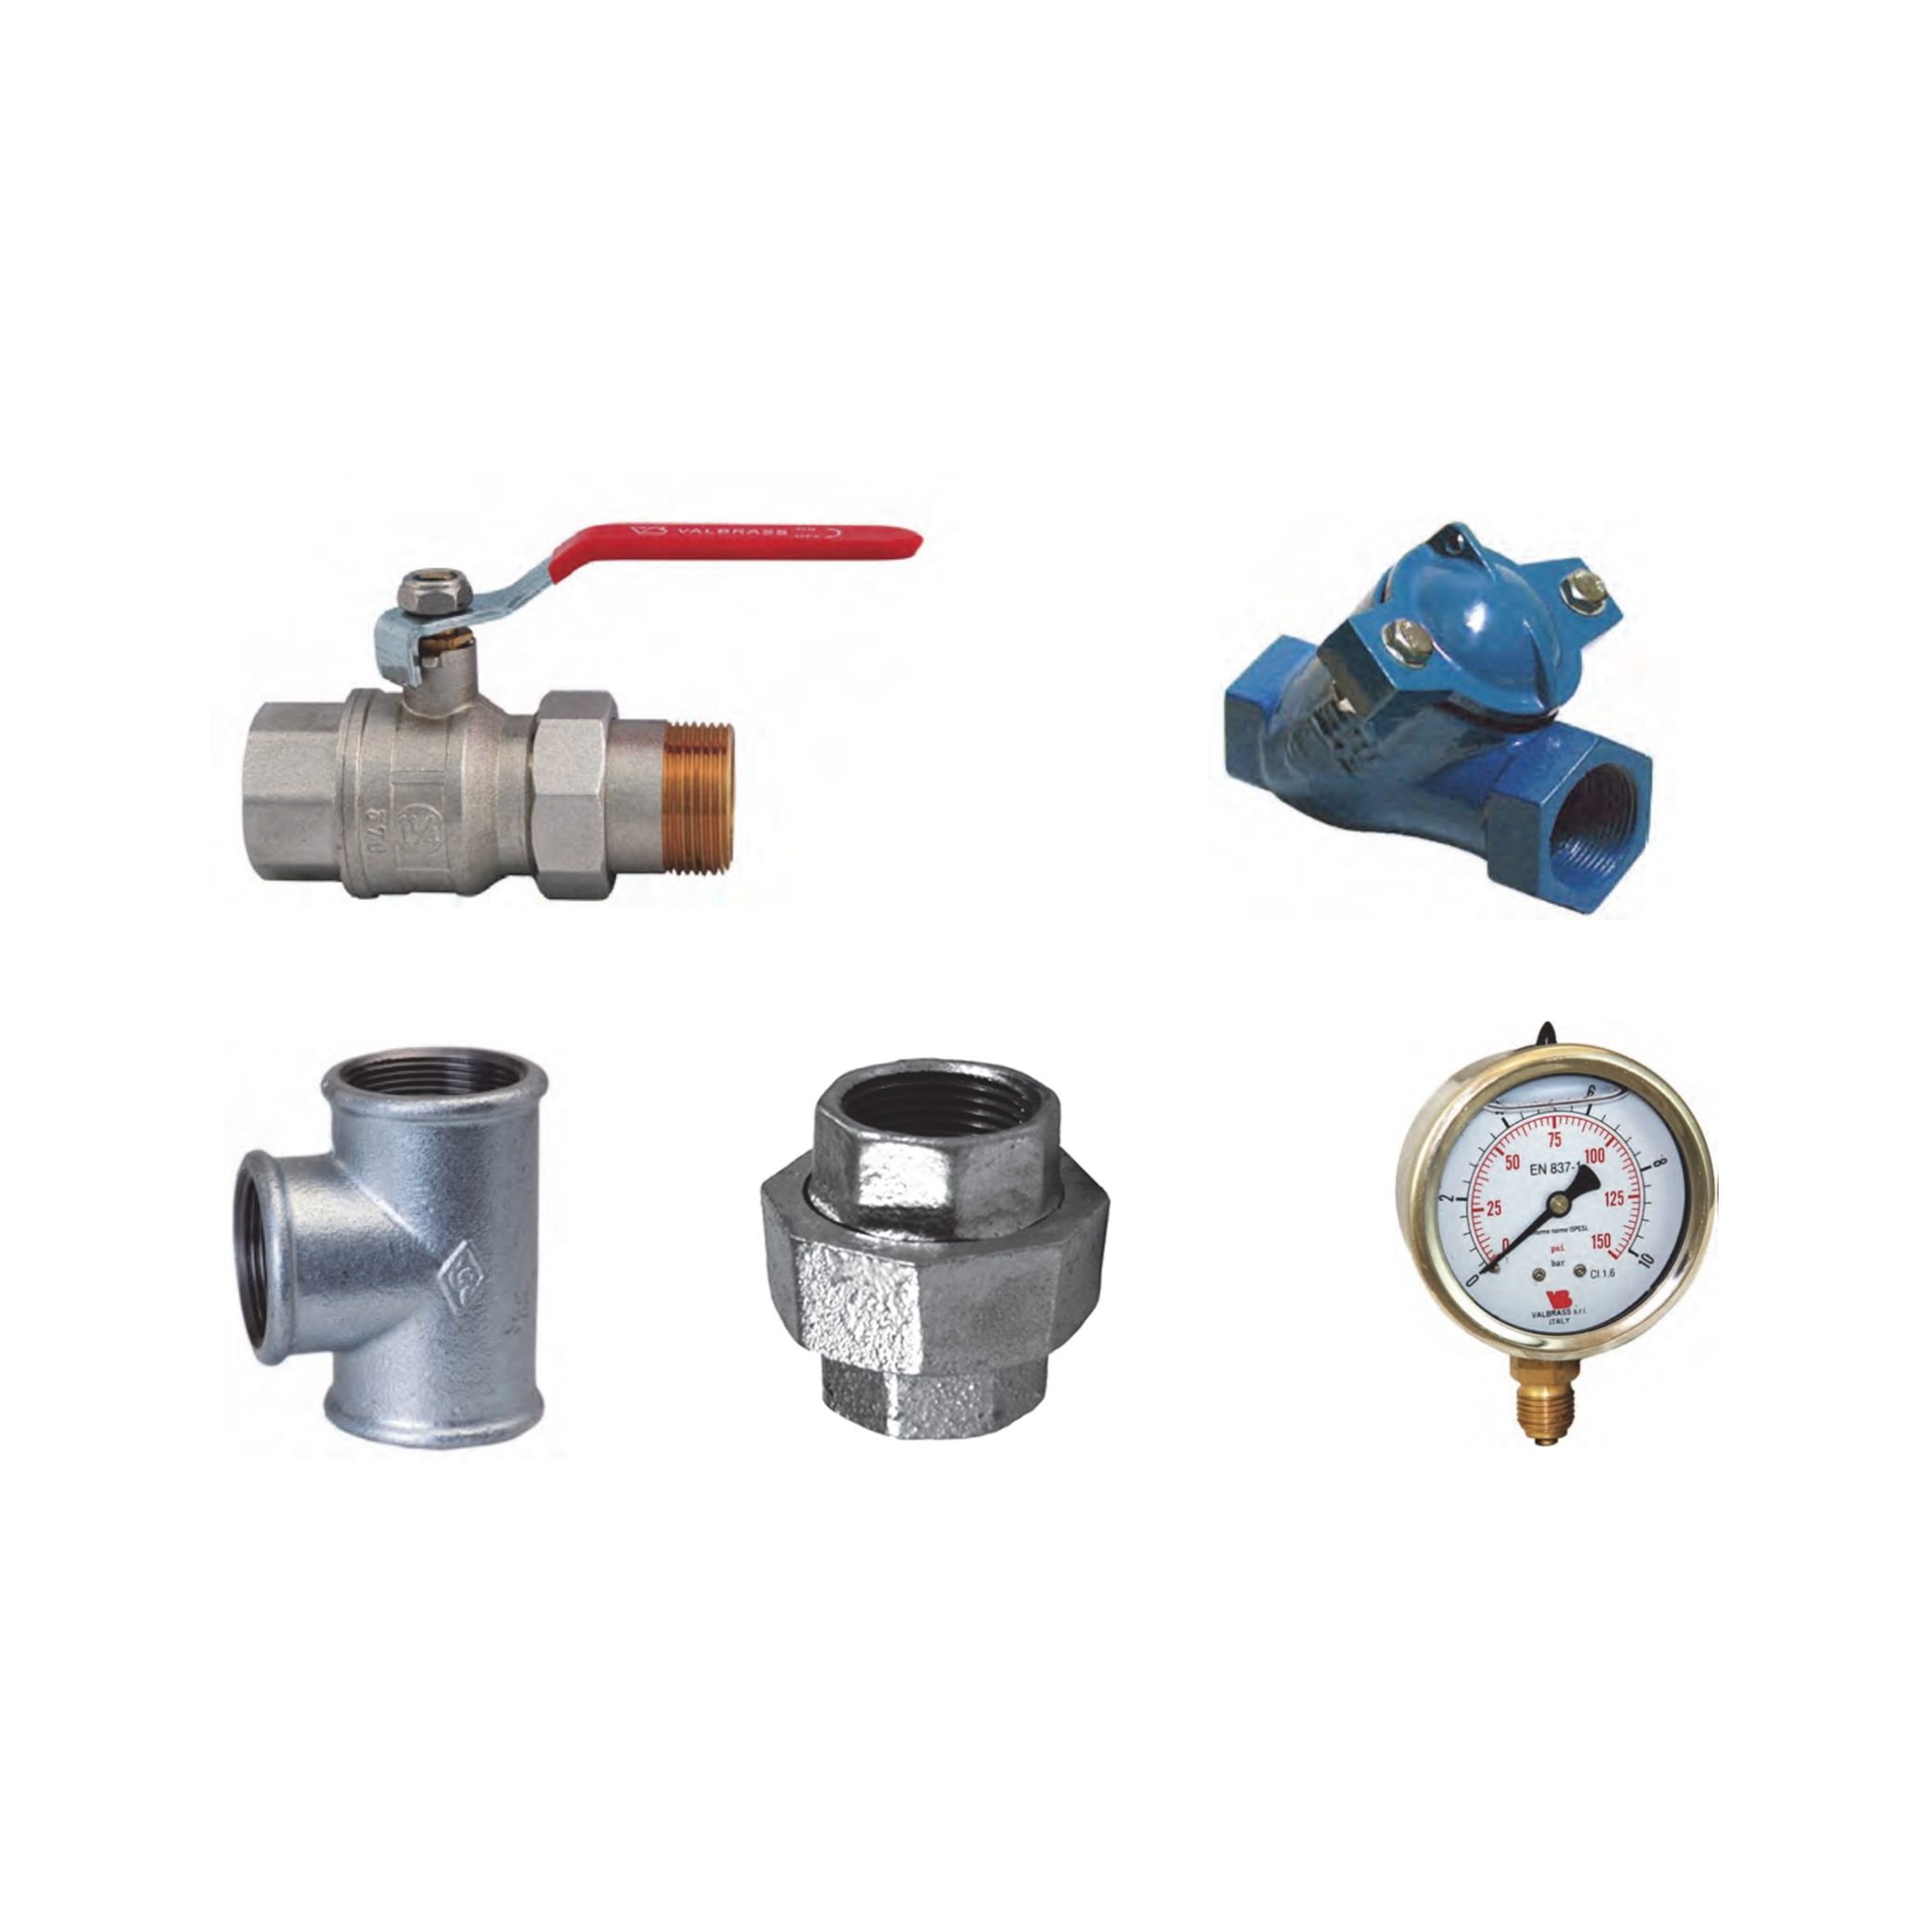 Fittings for Pumps